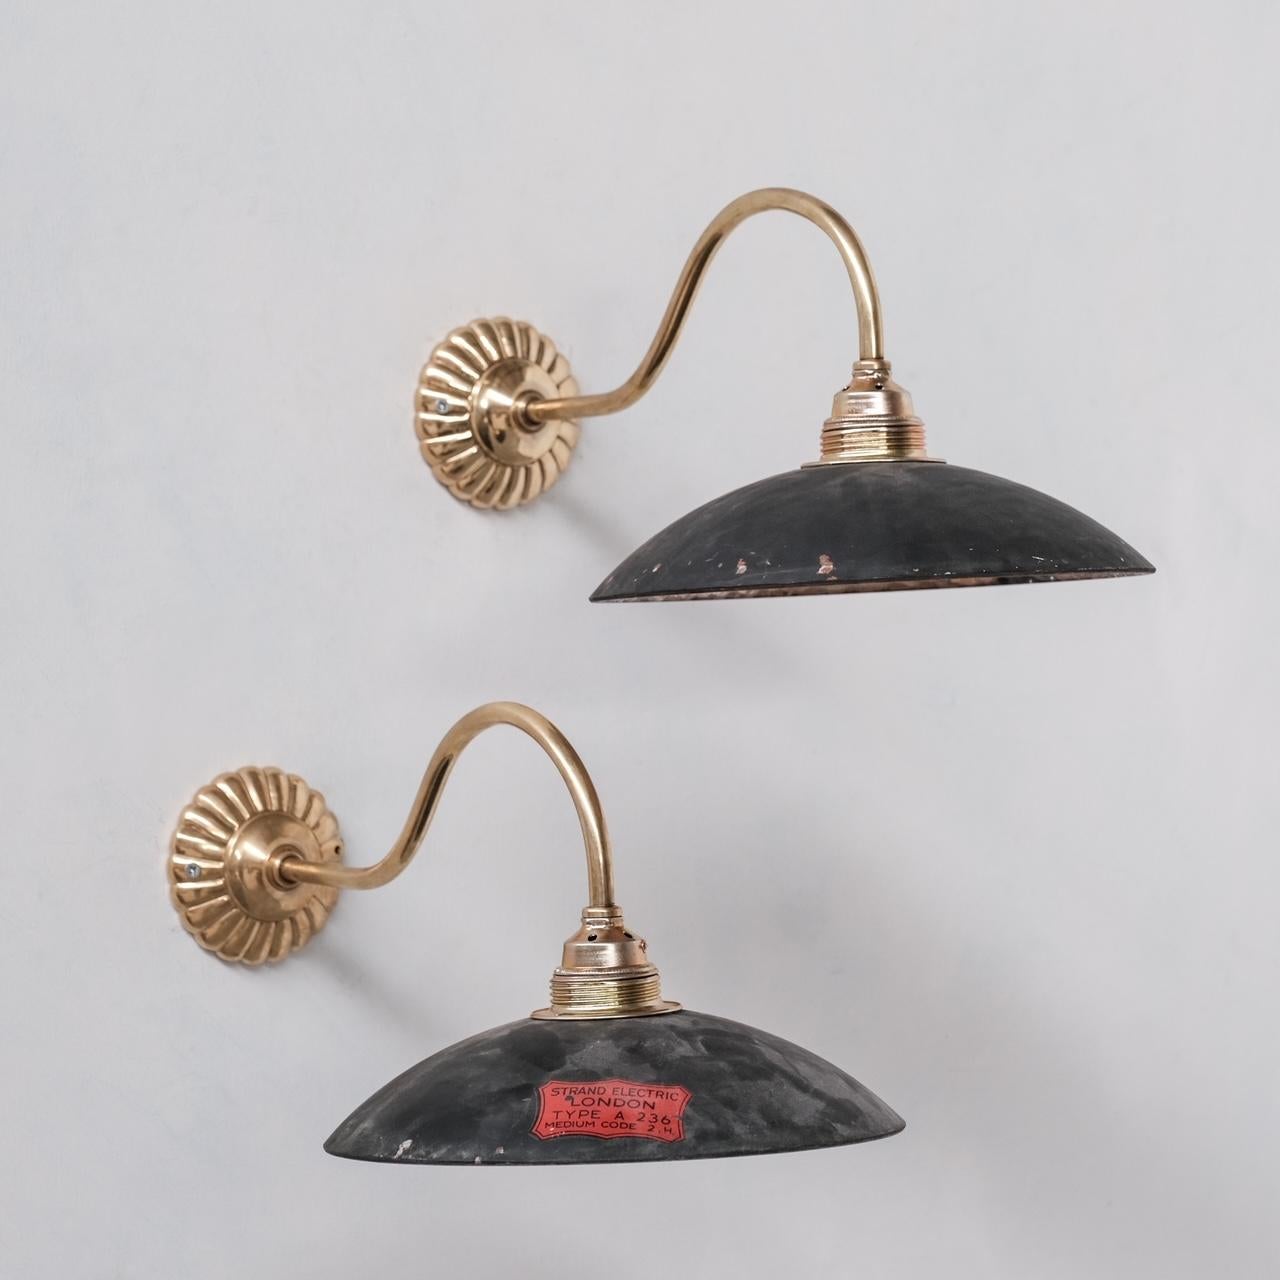 Antique Brass and Mercury Glass Wall Lights '19 Available' For Sale 6